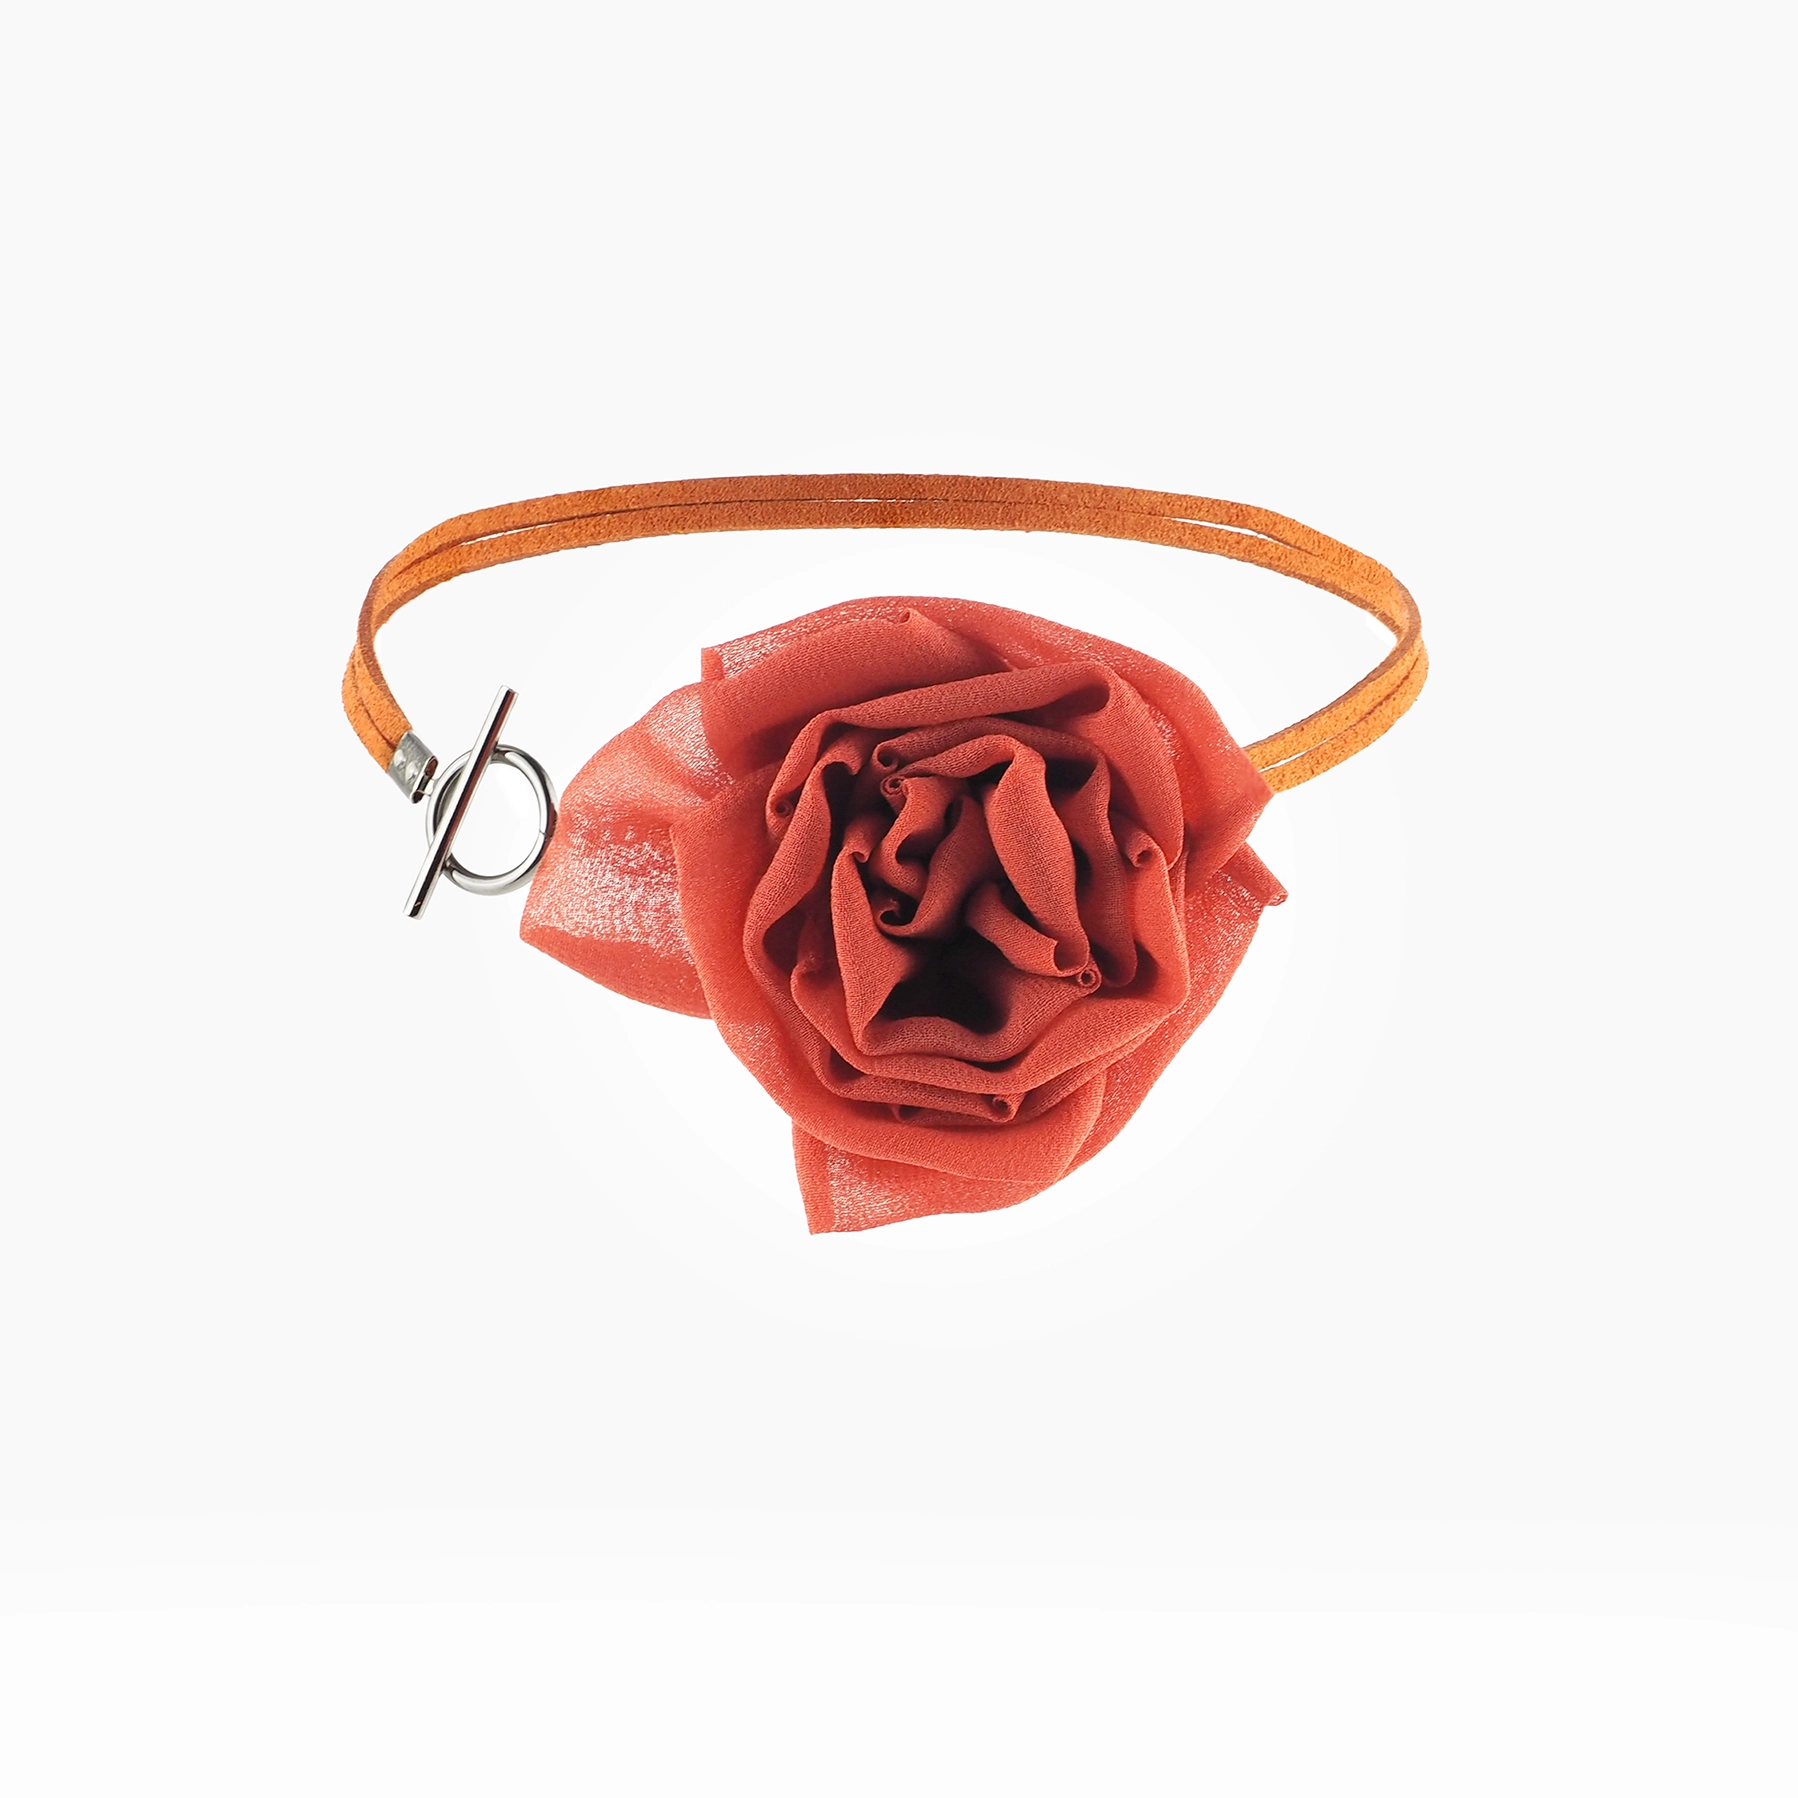 Red Silk Rose Choker Necklace with Toggle Clasp